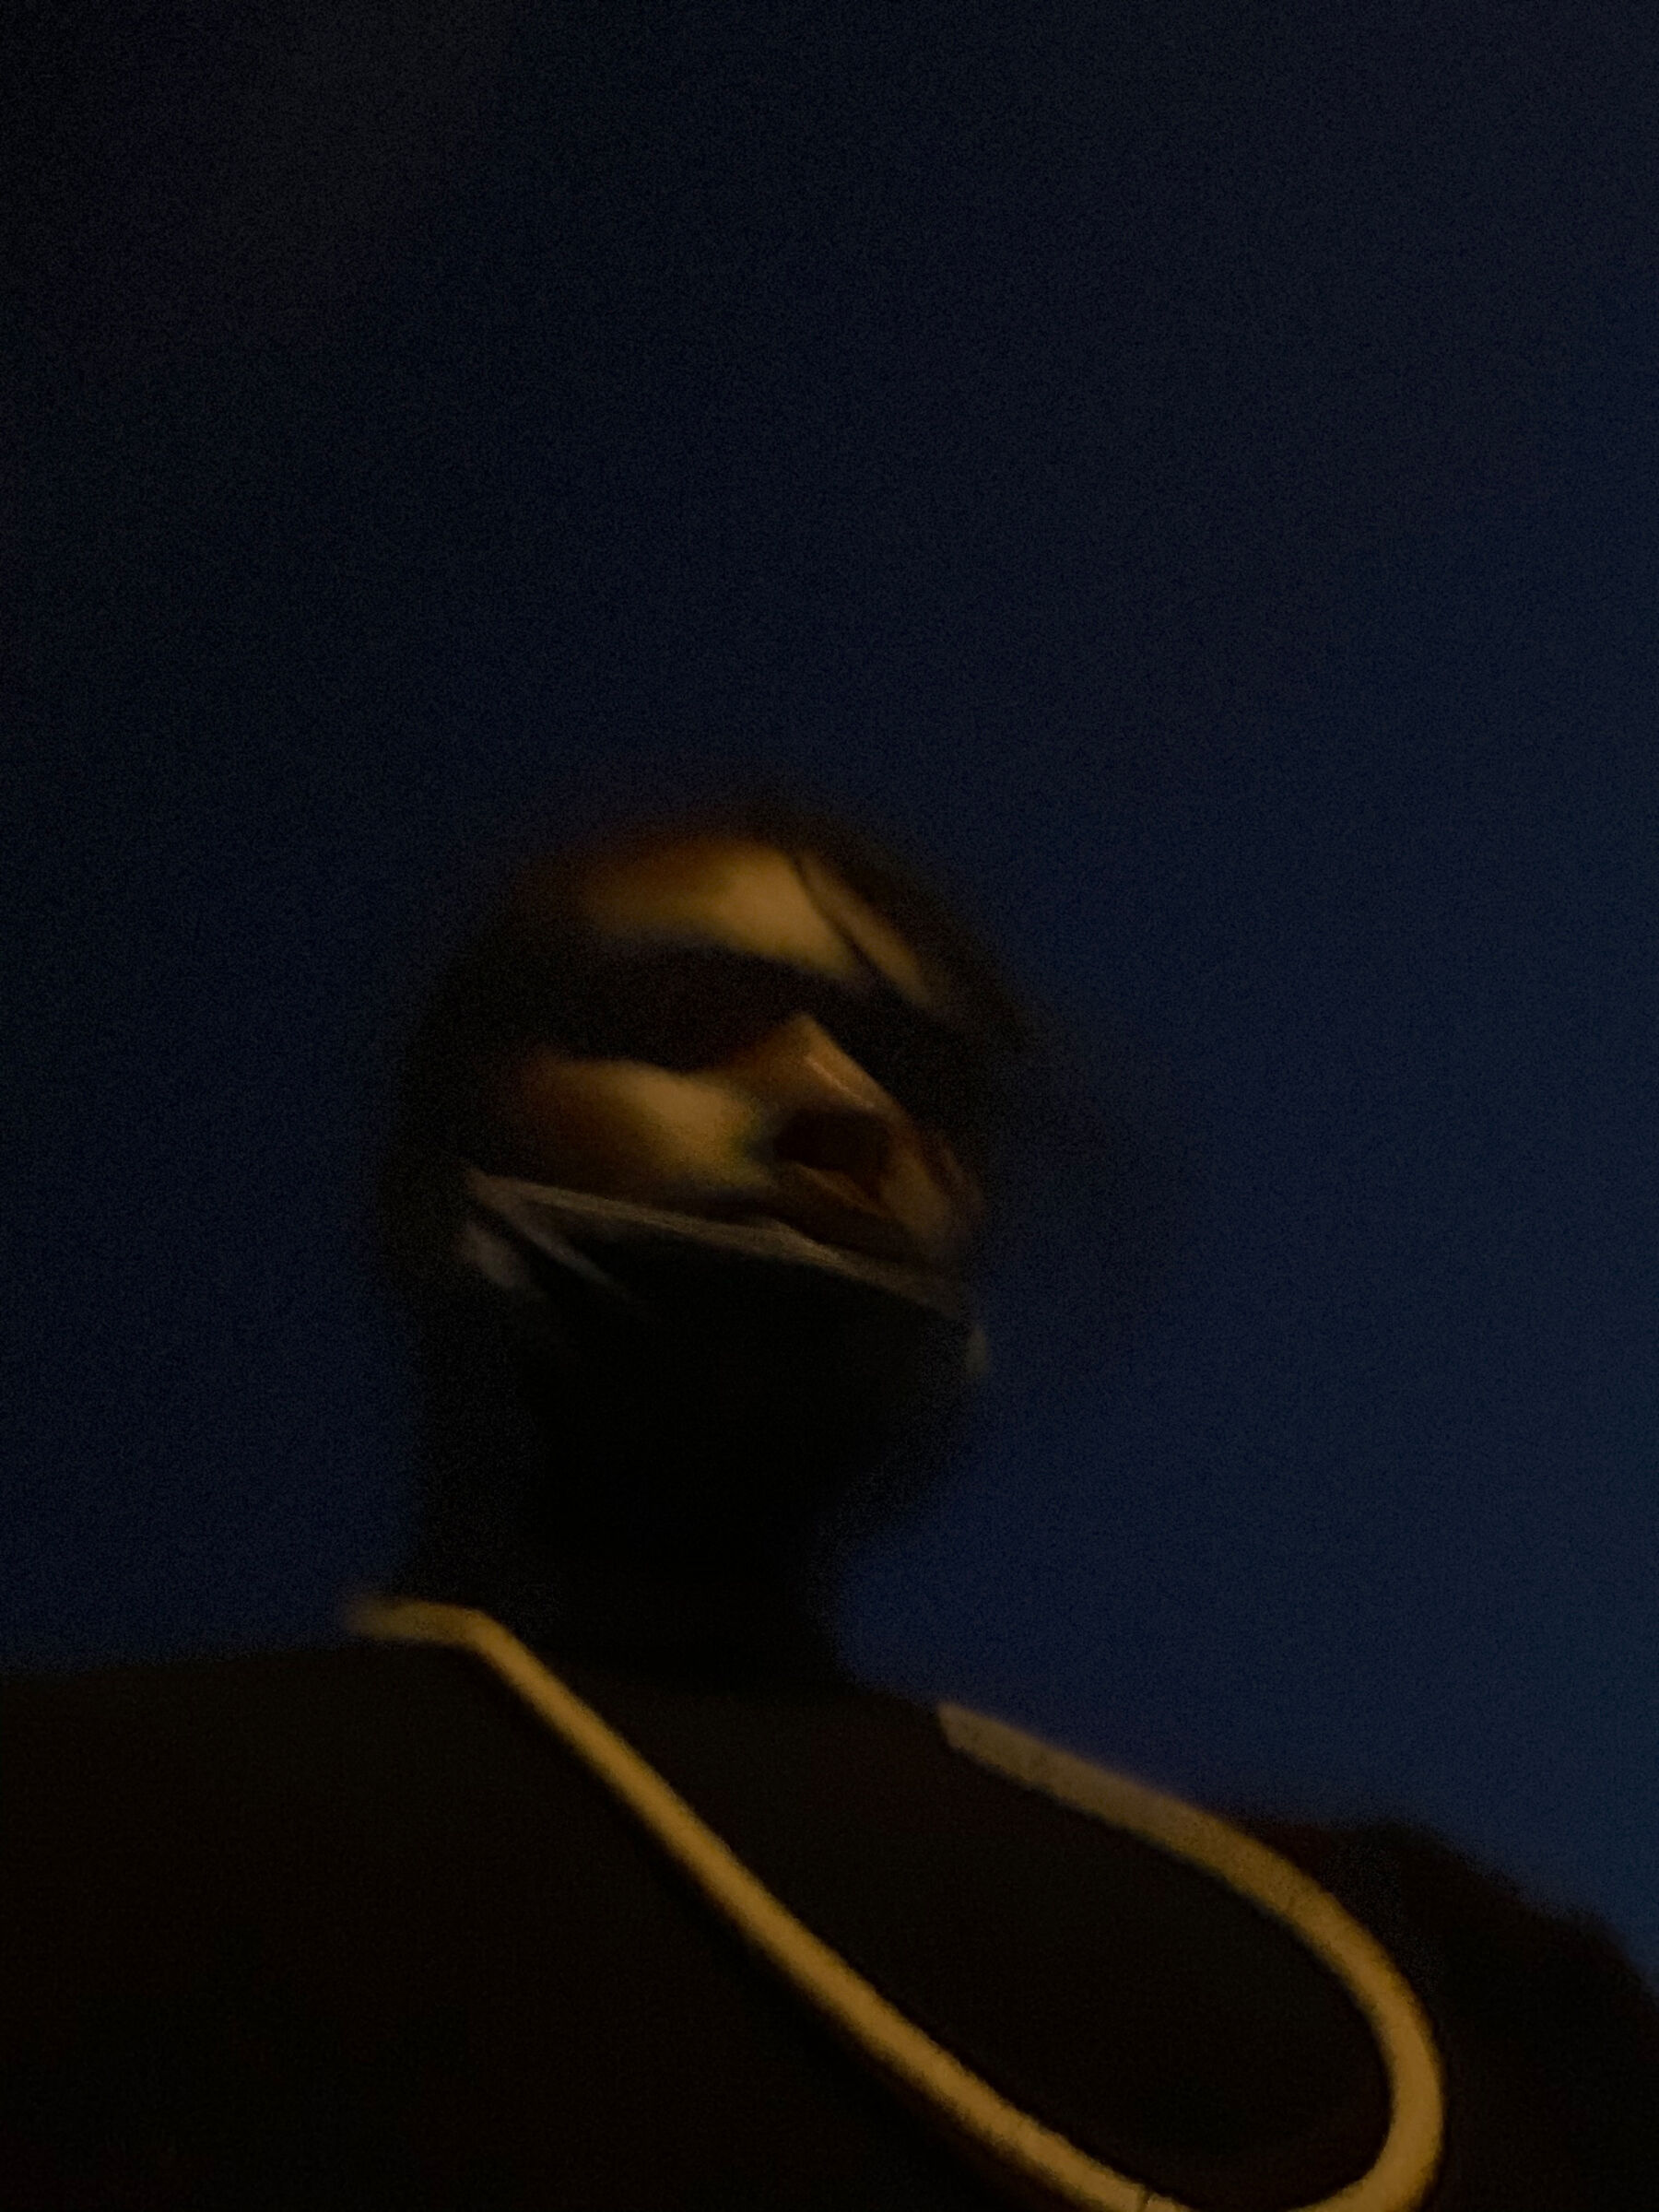 Blurry image of a person seen from a low angle, dressed in dark clothing and set against a dark blue background.